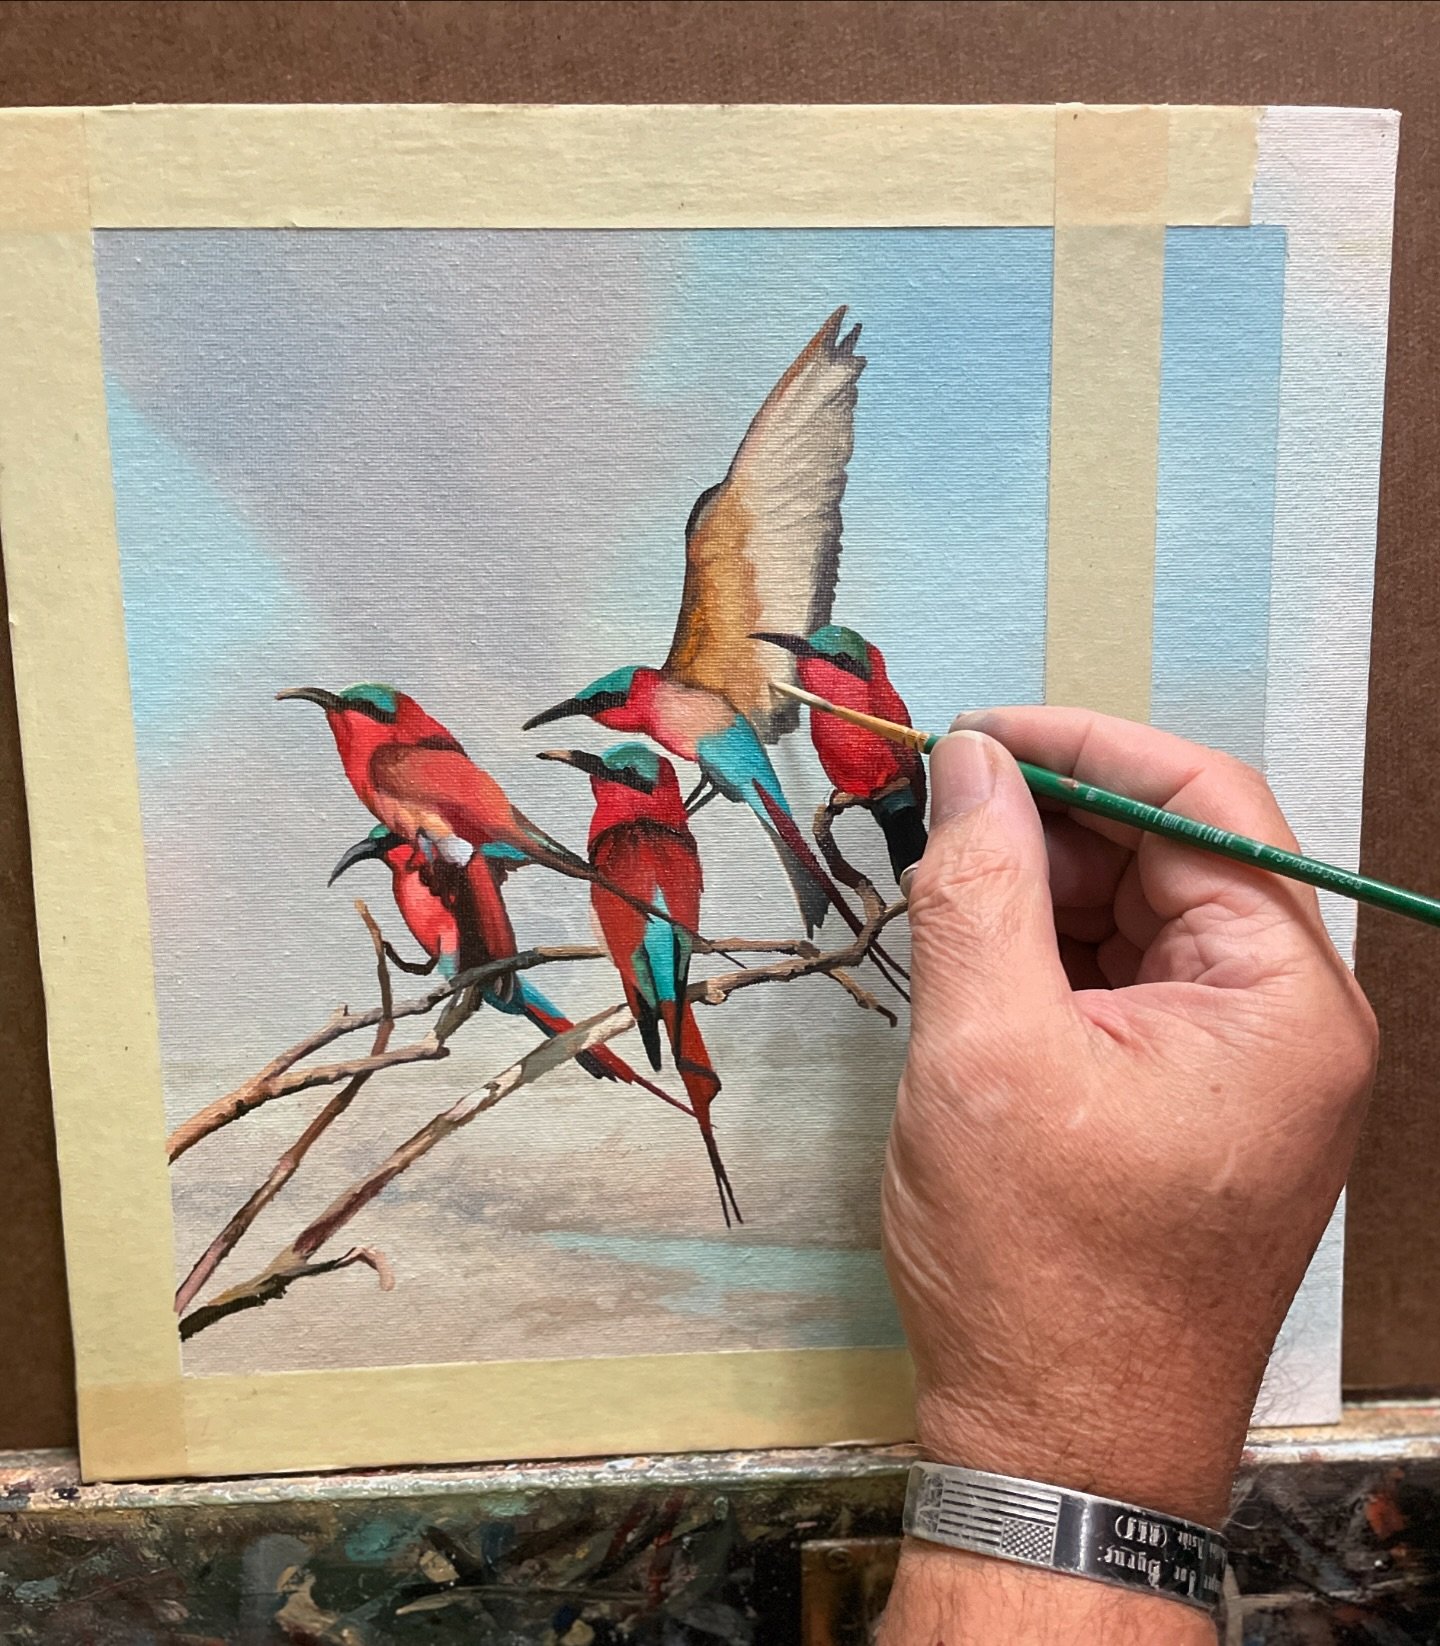 Carmine Bee-eaters on the easel this morning in the studio.  Their vibrant colors on full display.  #craigboneartist #carminebeeeater #zimbabwe #oilpainter